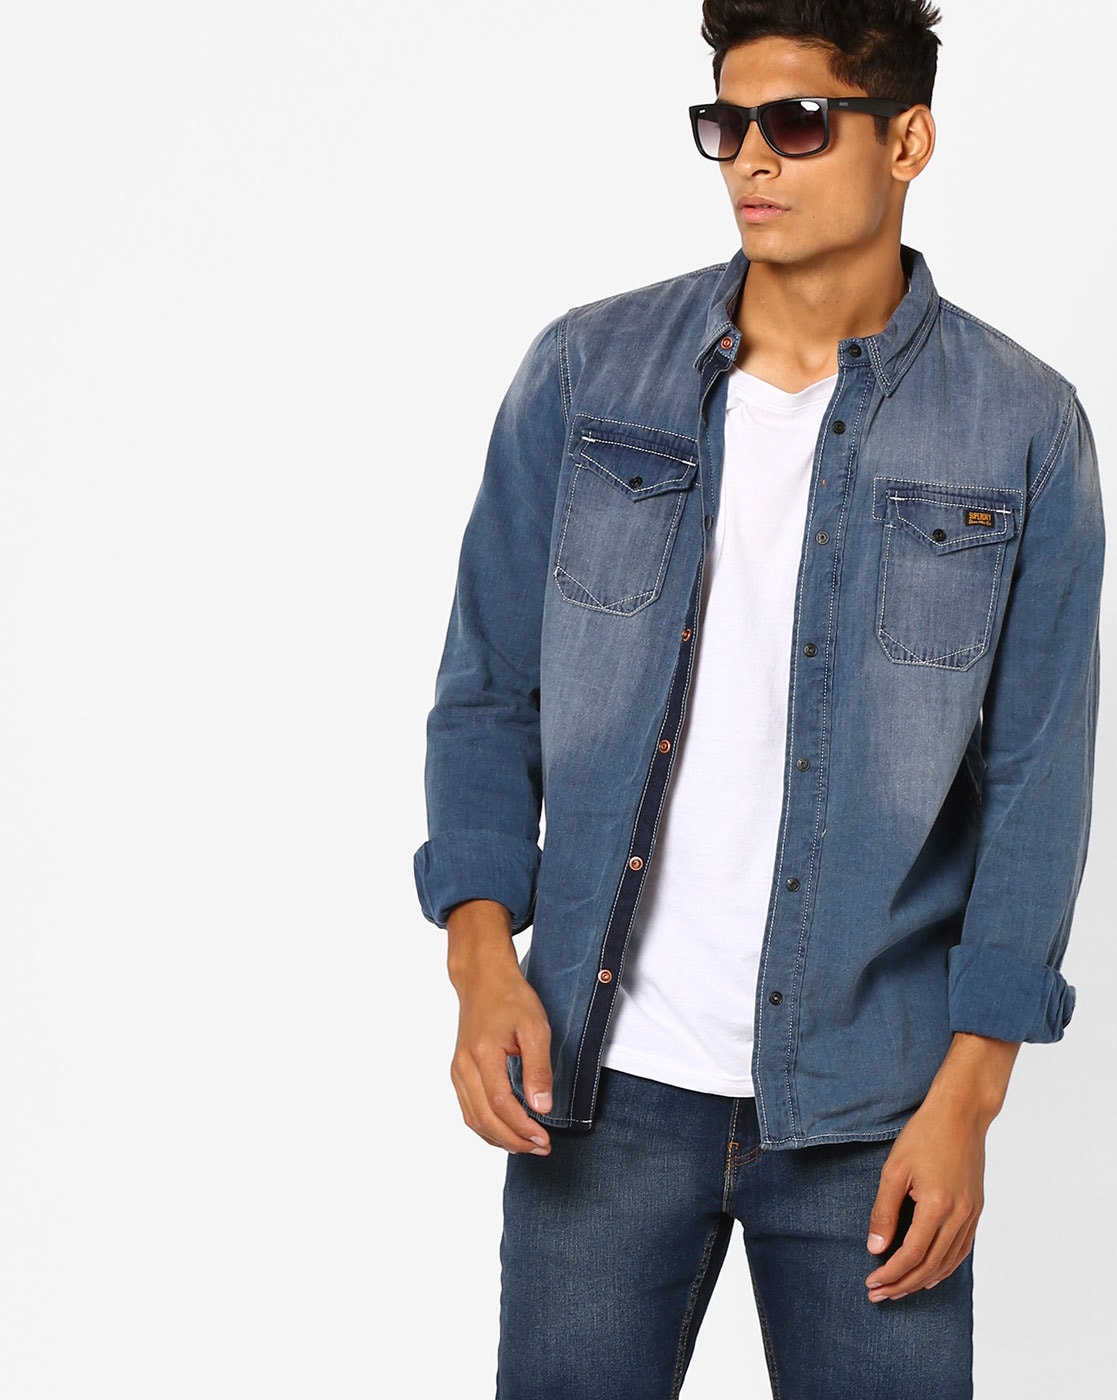 roadster jeans shirts